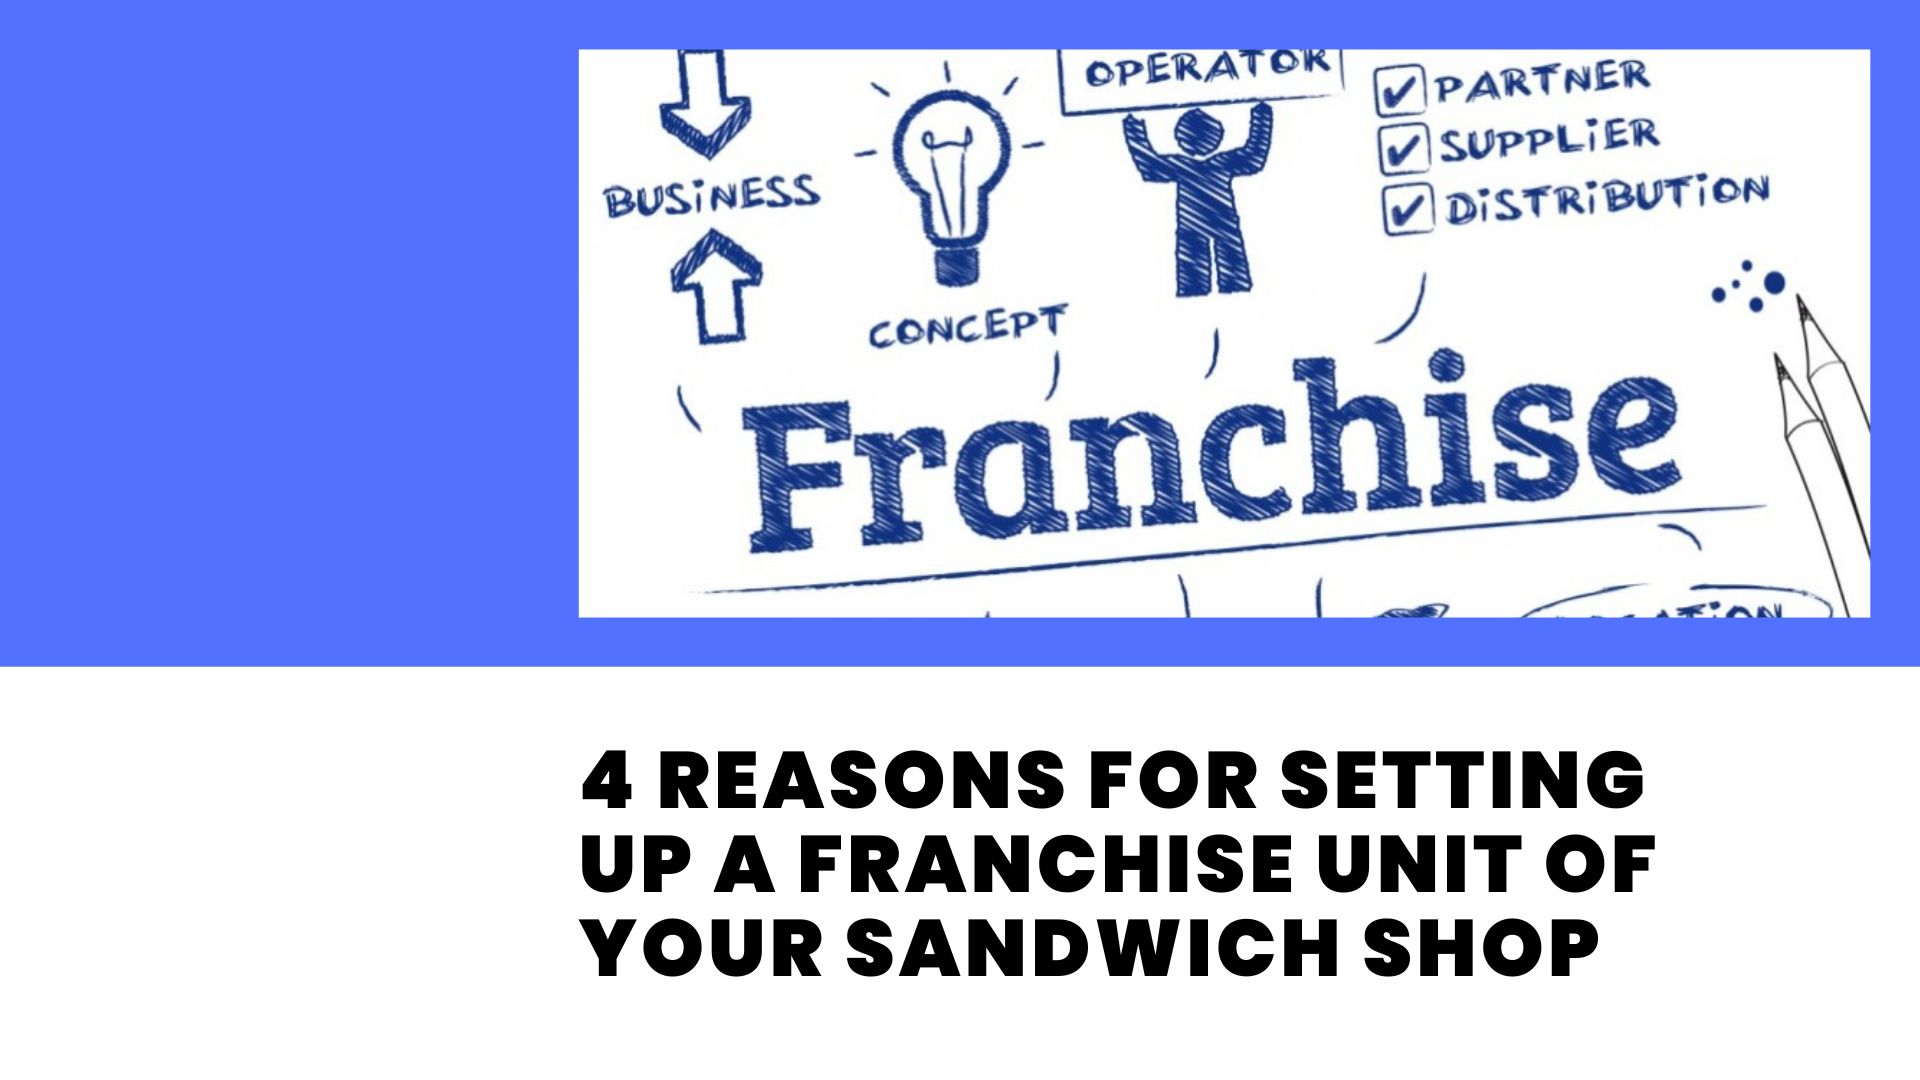 4 Reasons for Setting Up a Franchise Unit of Your Sandwich Shop